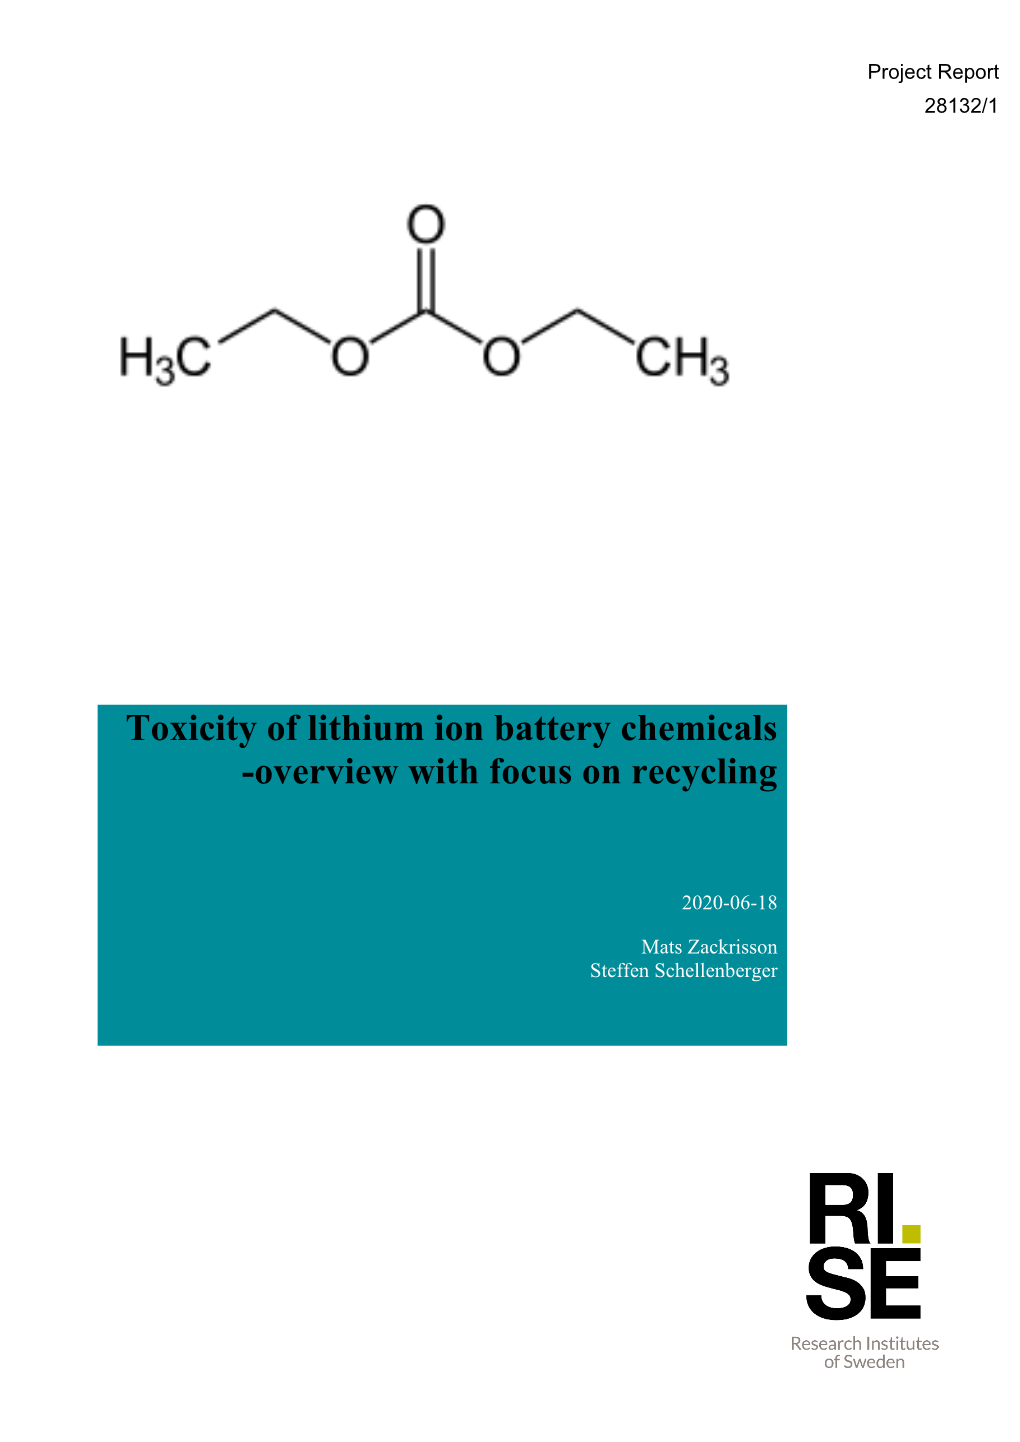 Toxicity of Lithium Ion Battery Chemicals -Overview with Focus on Recycling